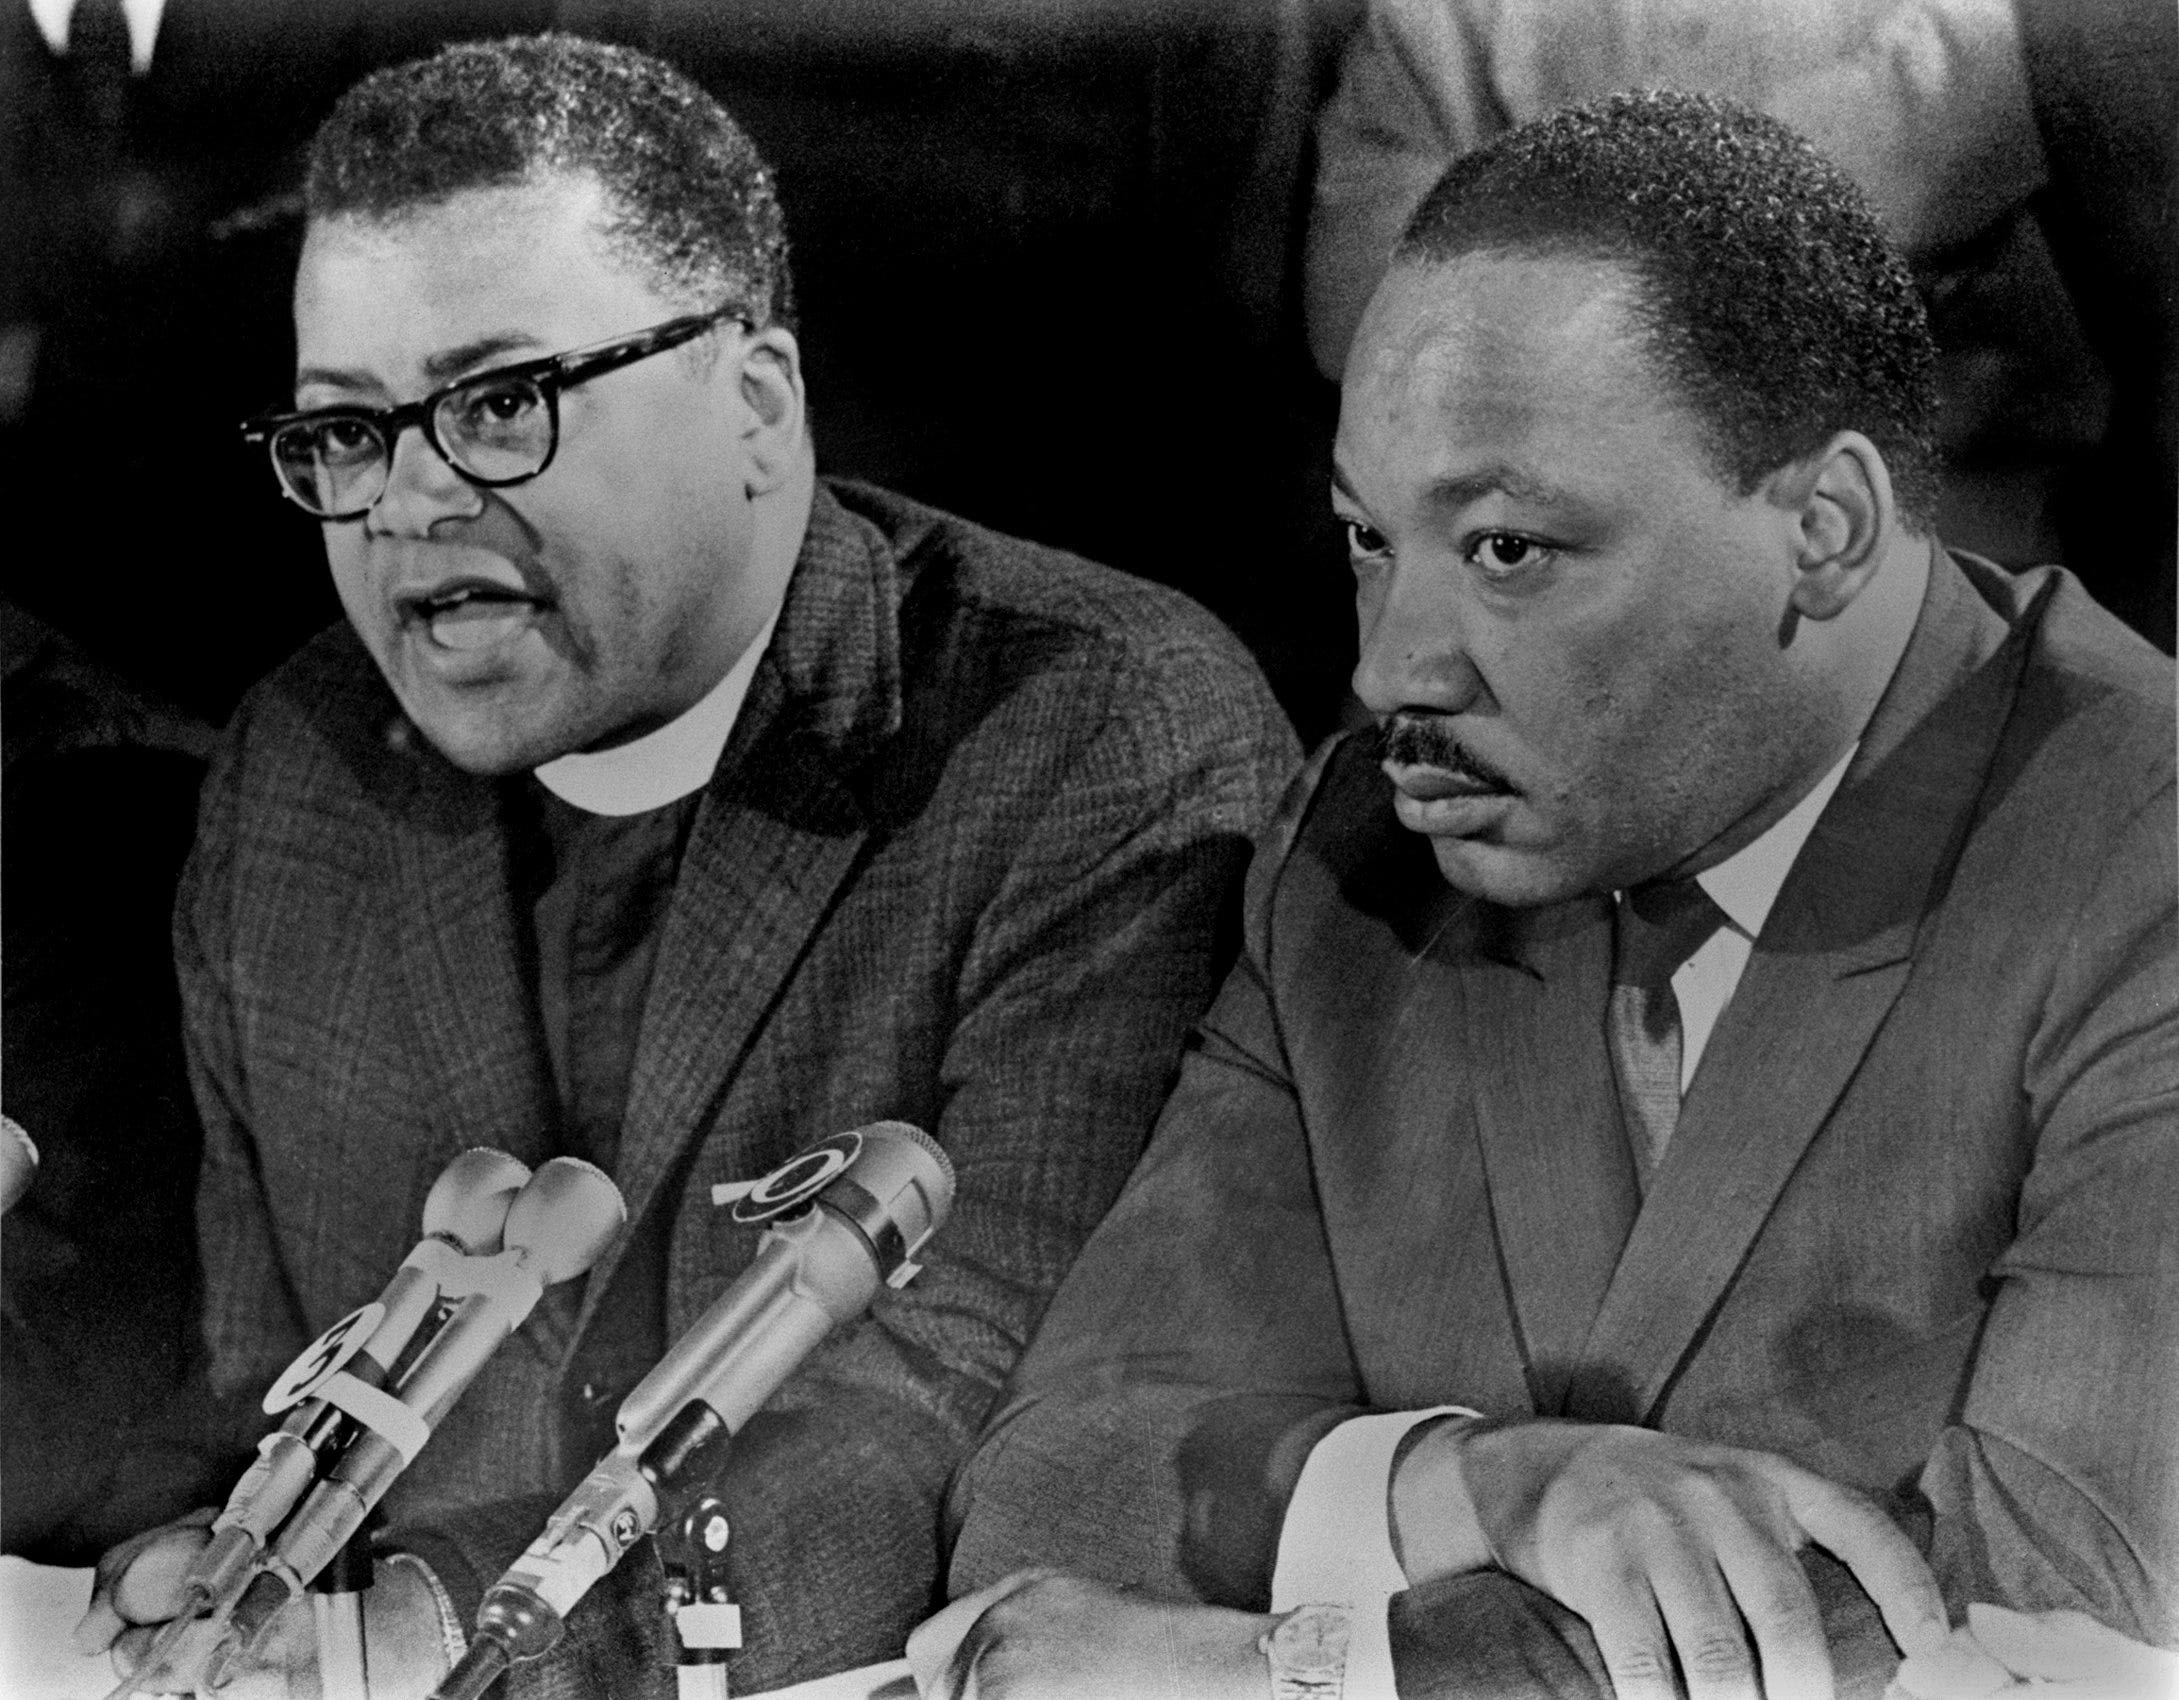 We were Martin Luther King Jr.'s inner circle. Now, only two of us remain.